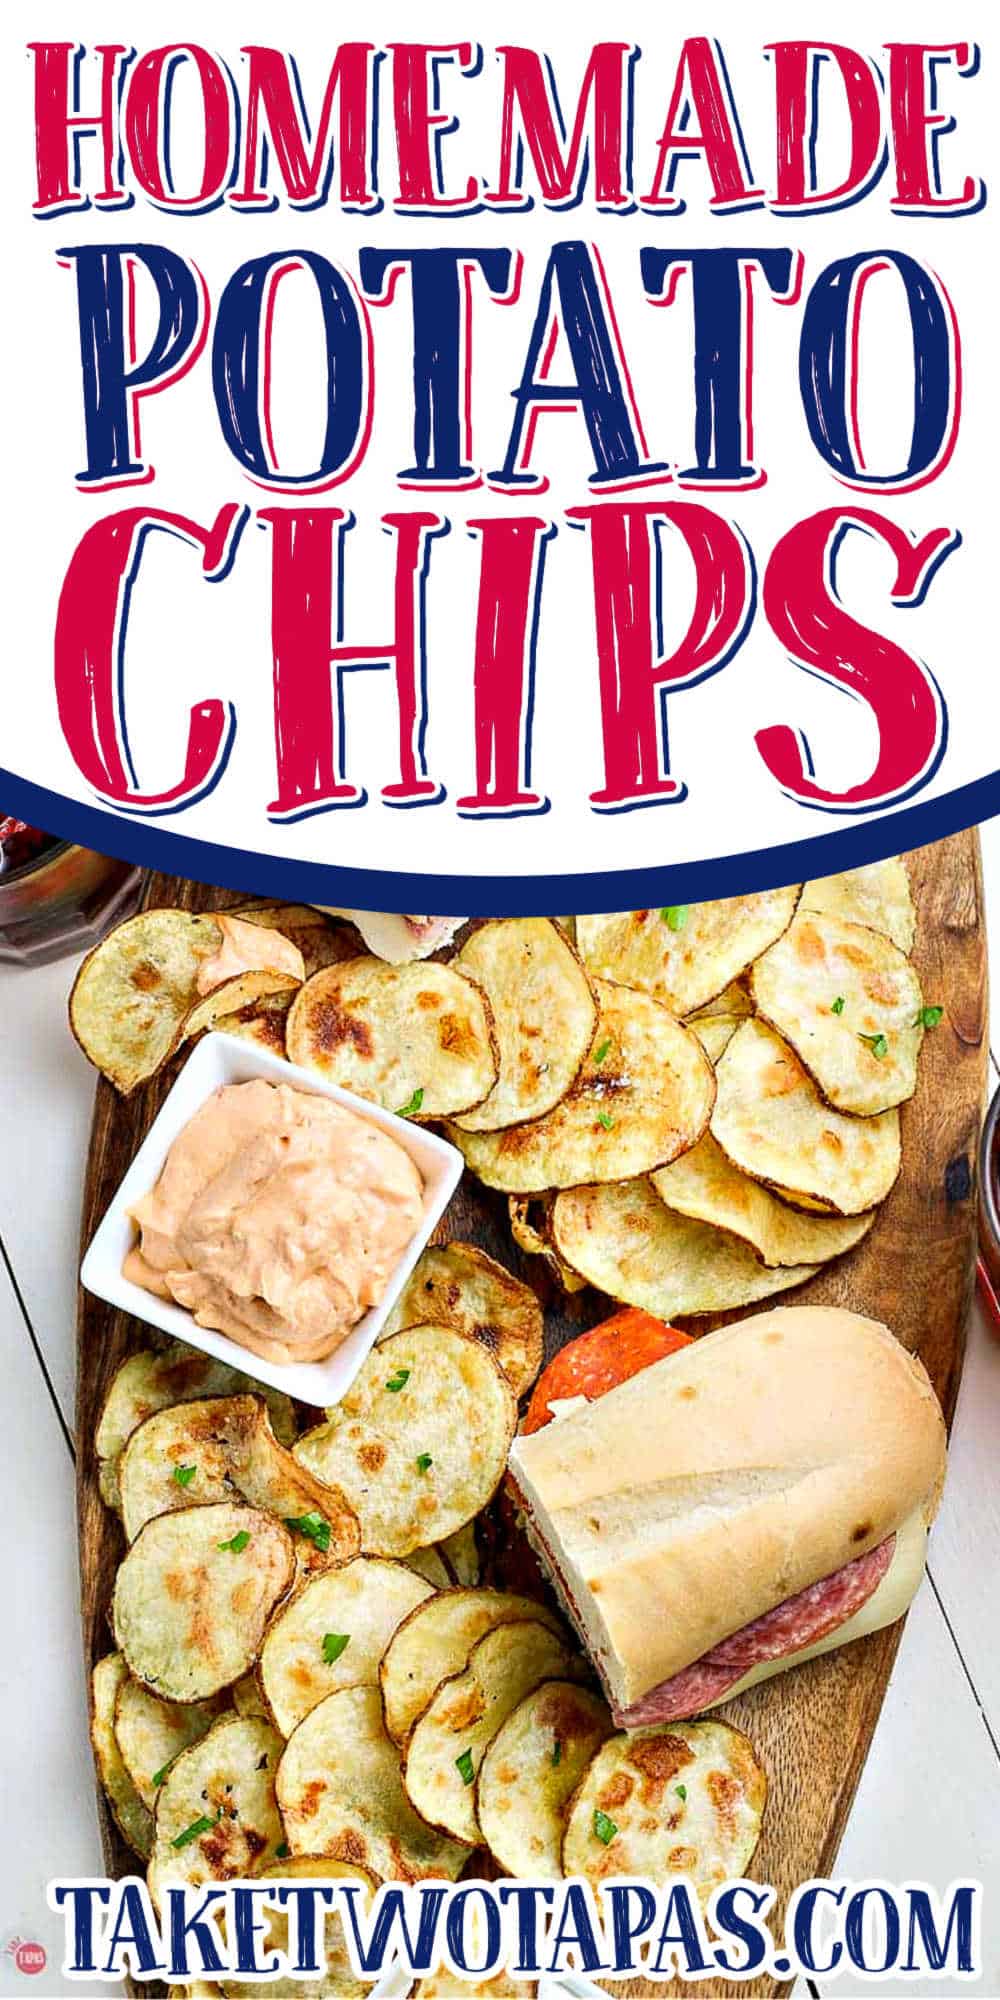 collage of potato chips with text "air fryer potato chips"